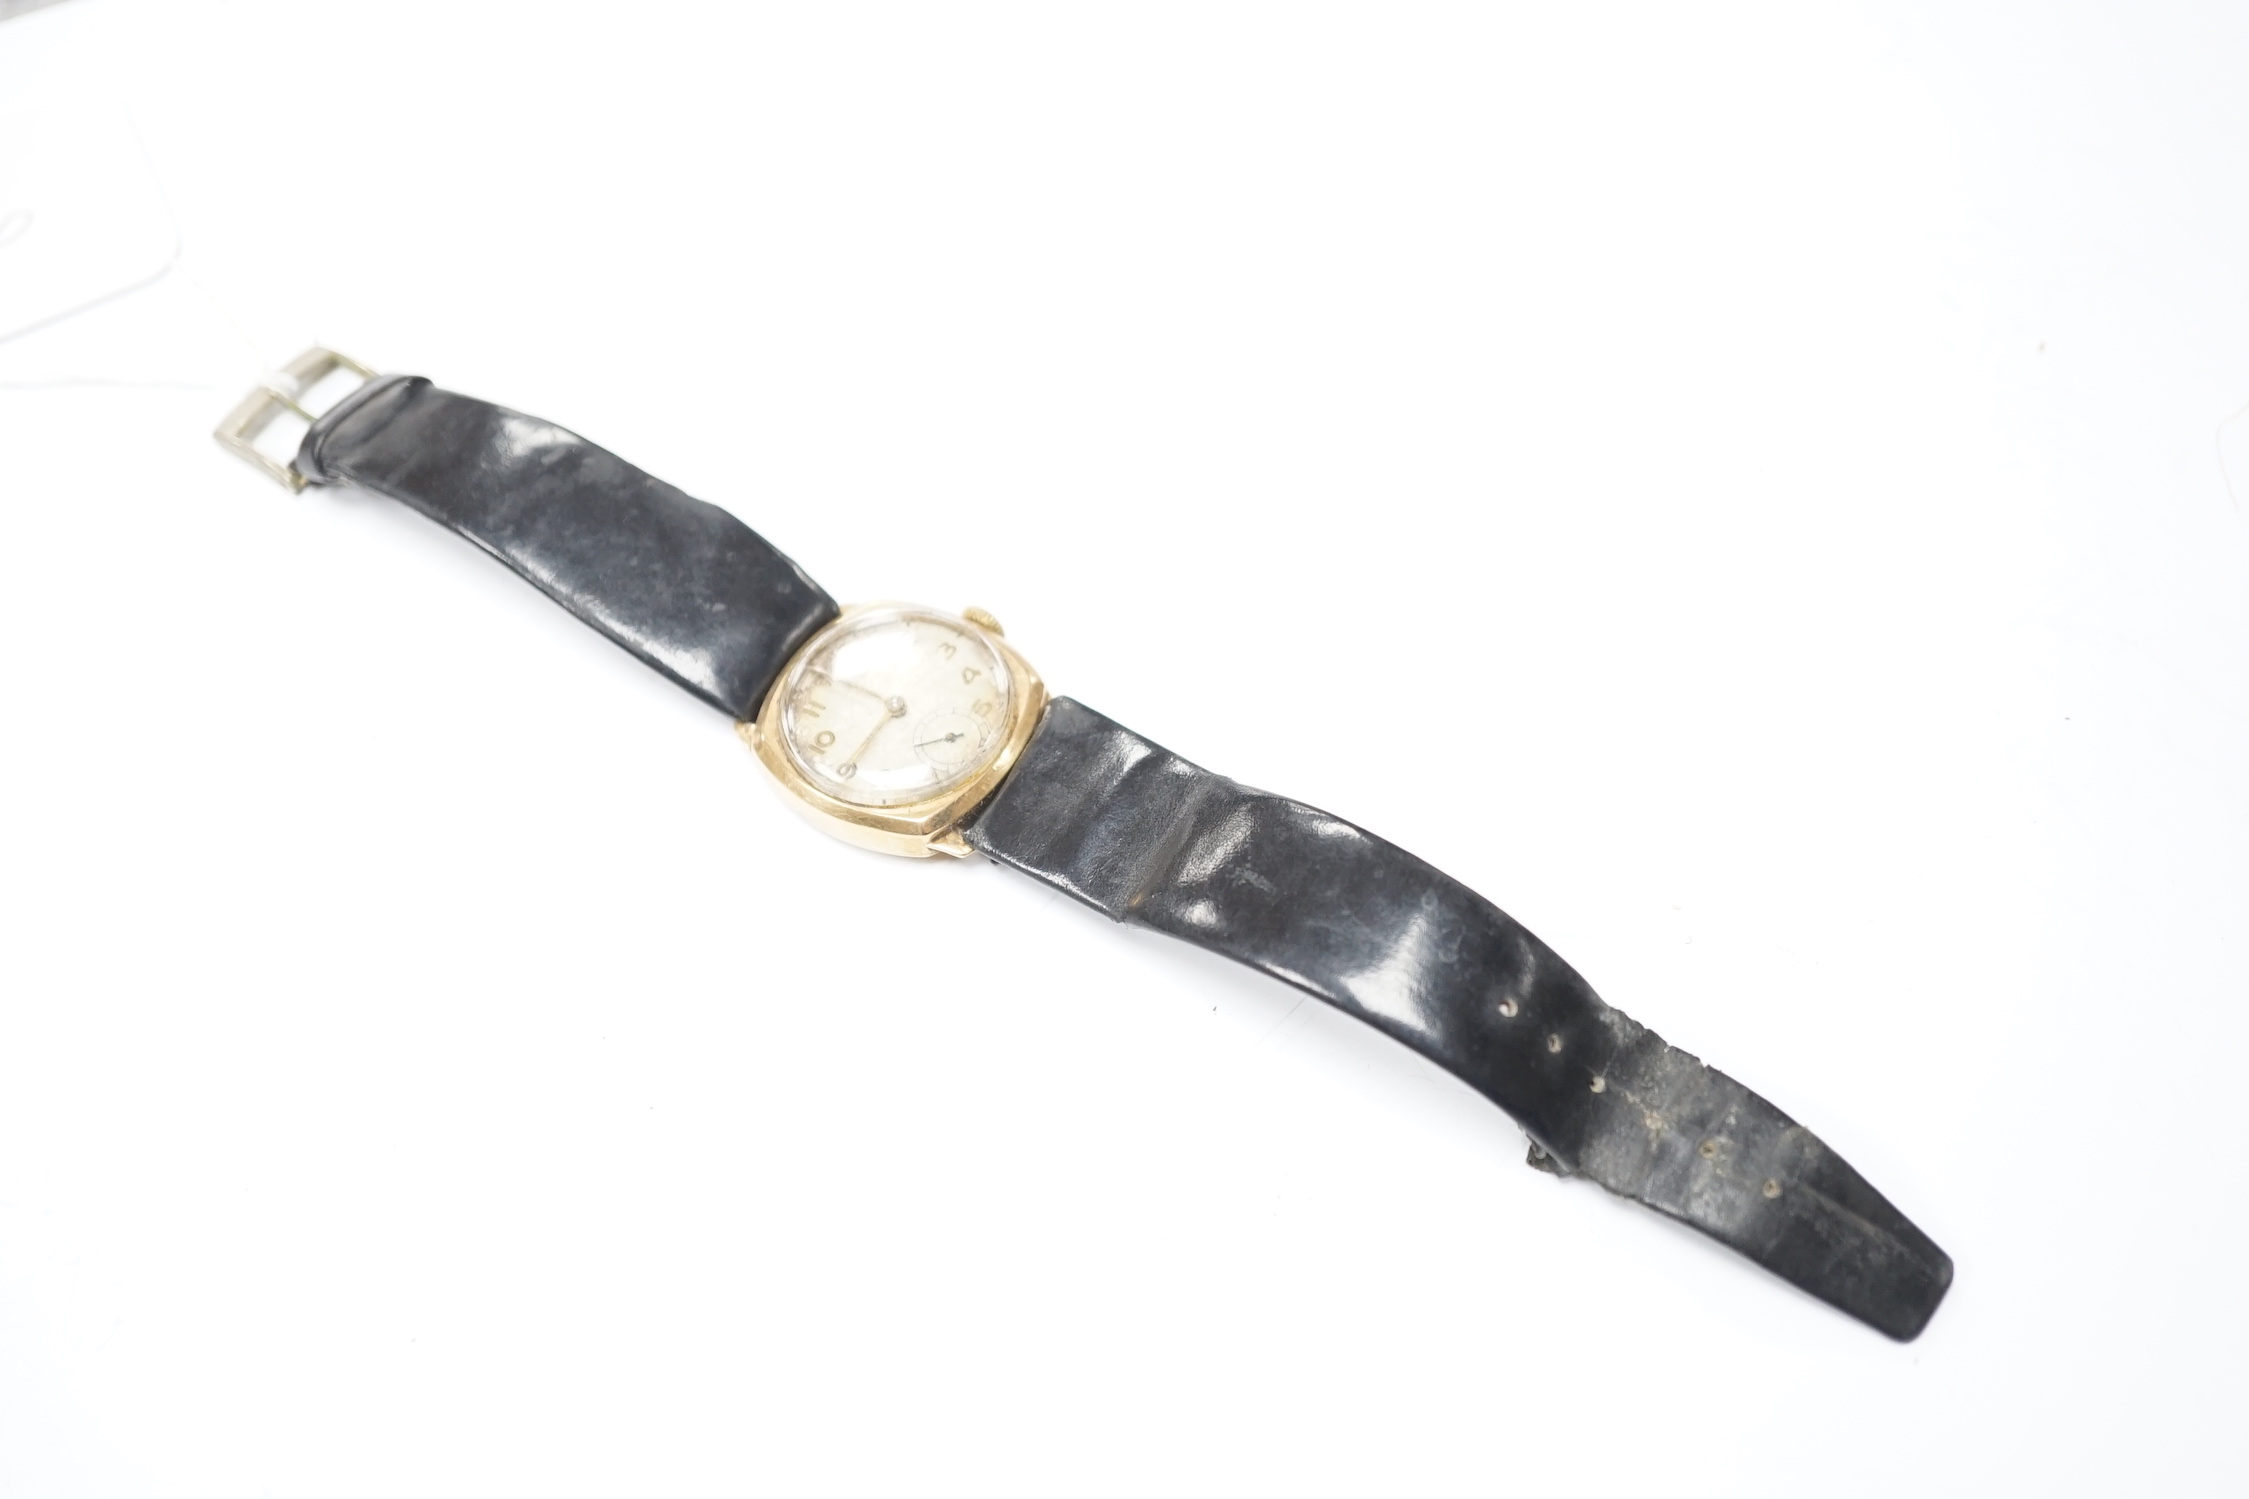 A gentleman's early to mid 20th century 9ct gold manual wind wrist watch, with subsidiary seconds, on a leather strap.